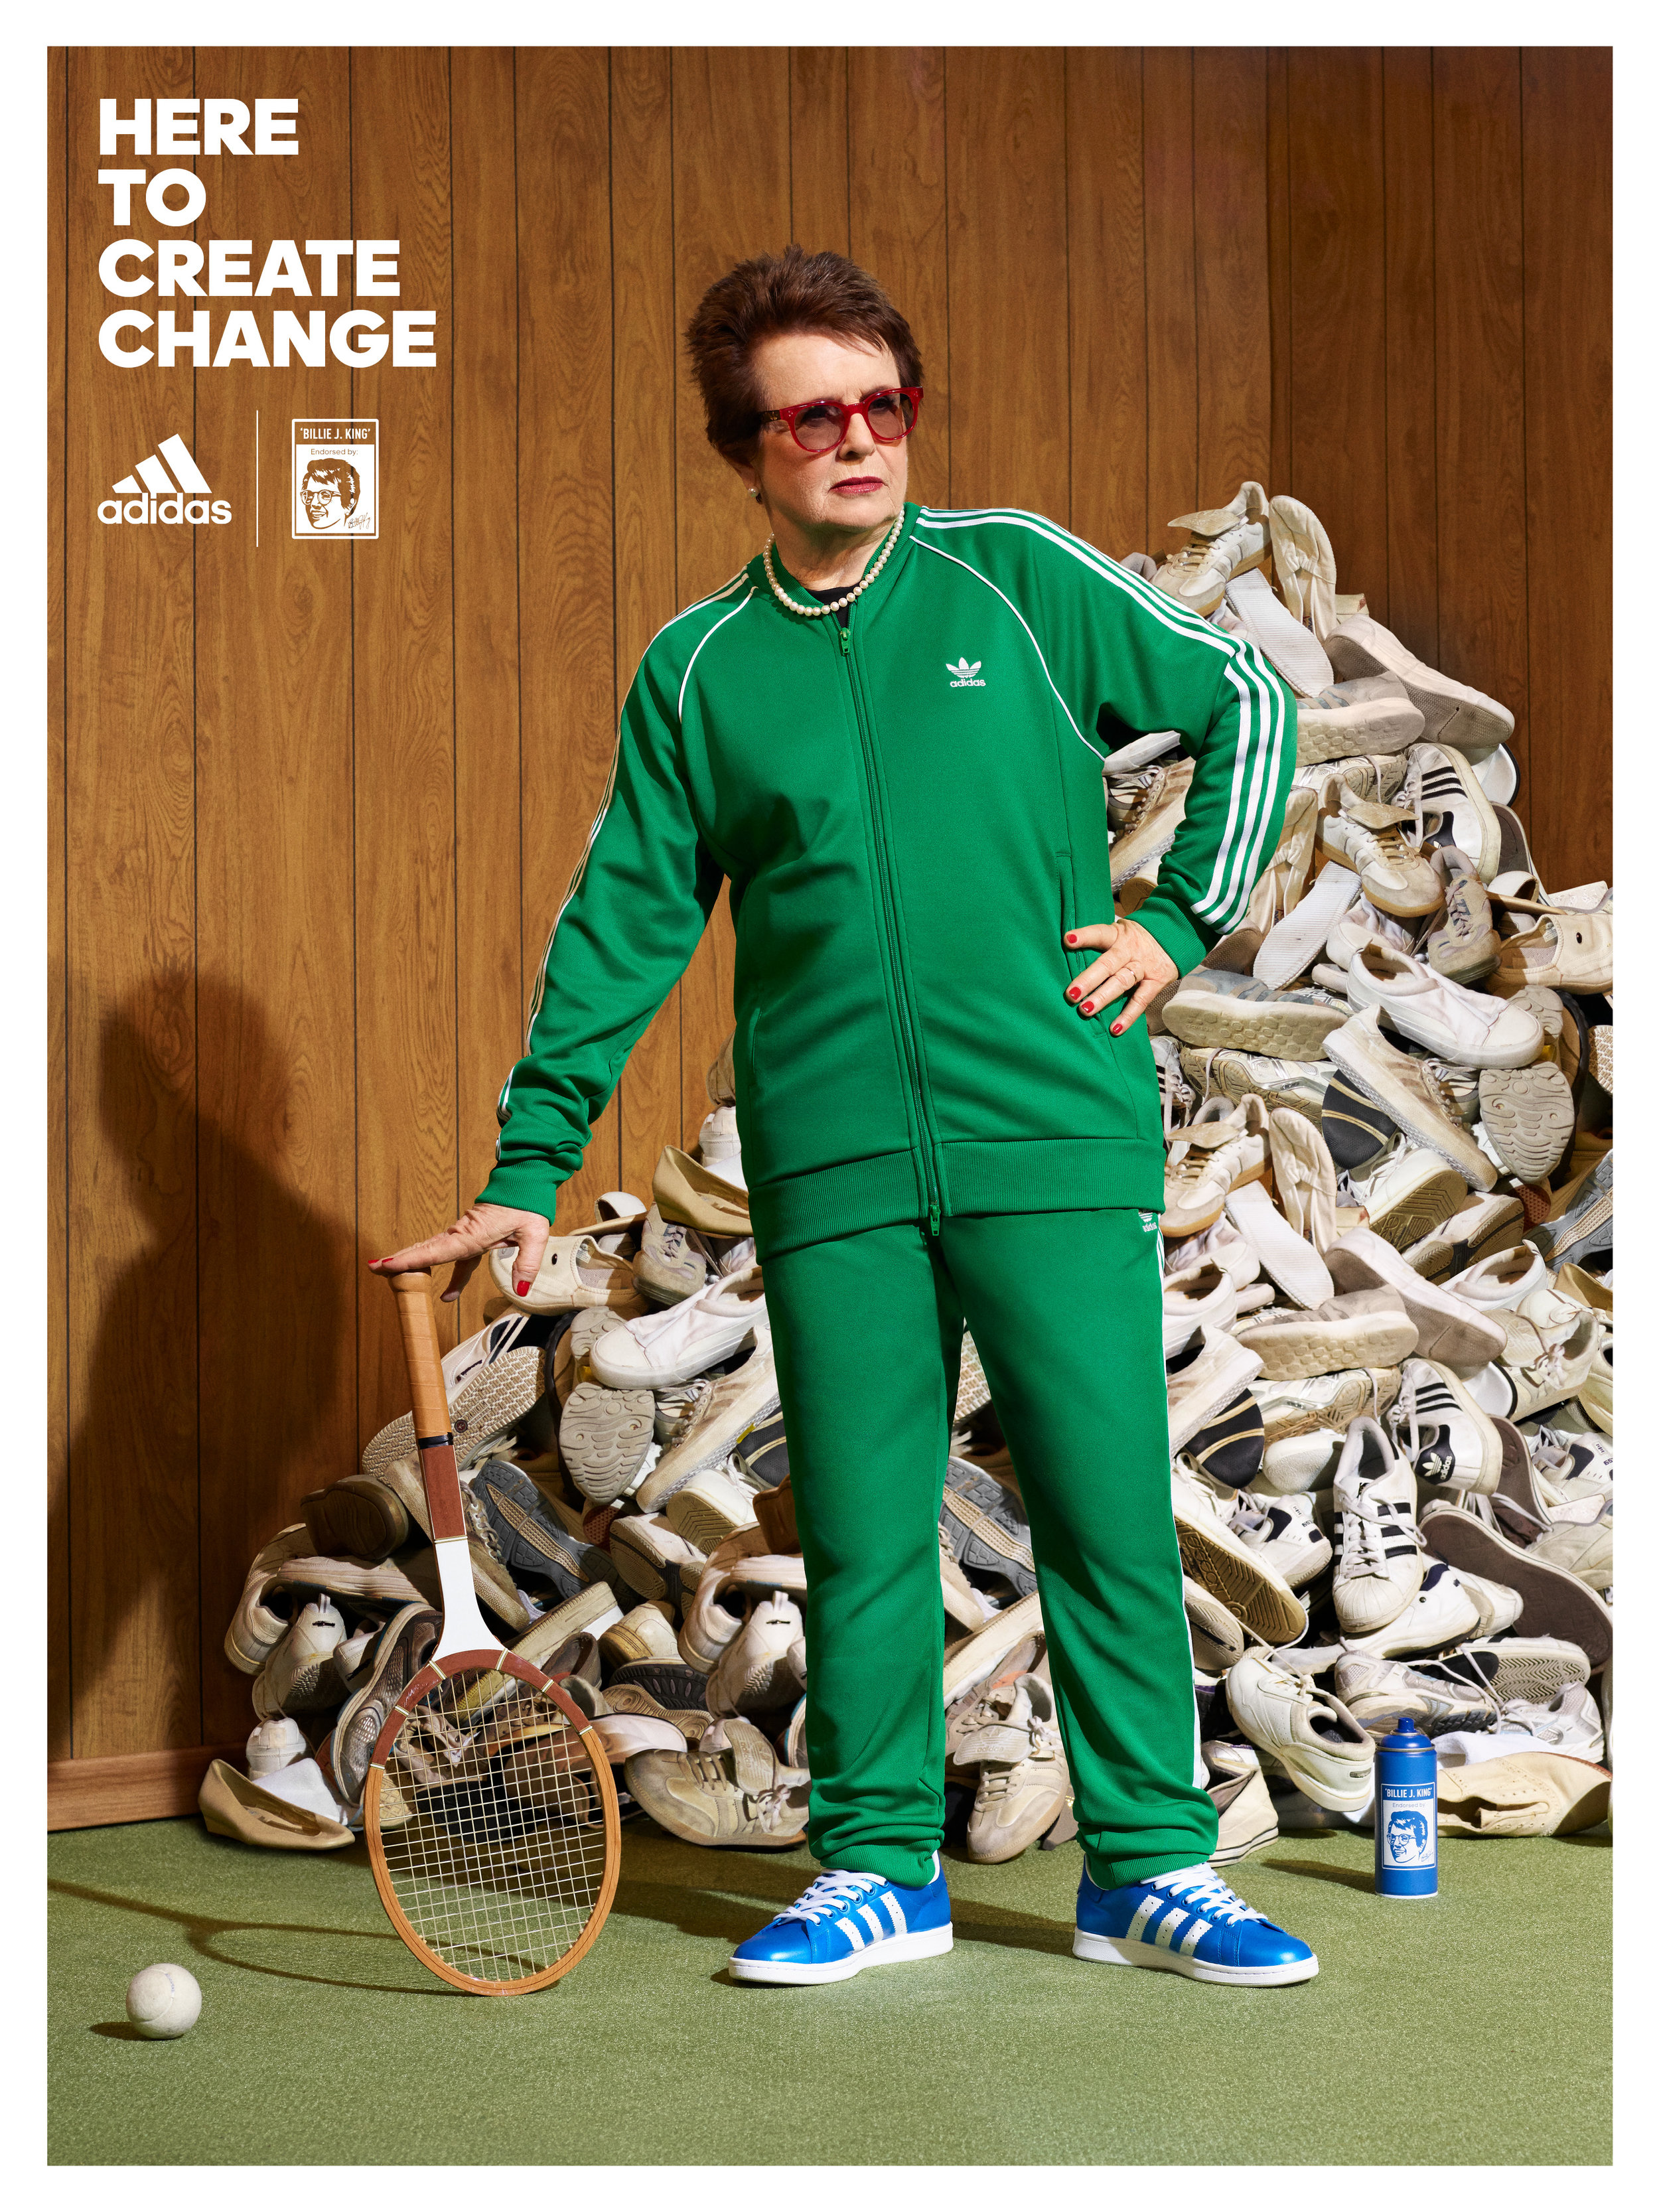 billie jean king your shoes